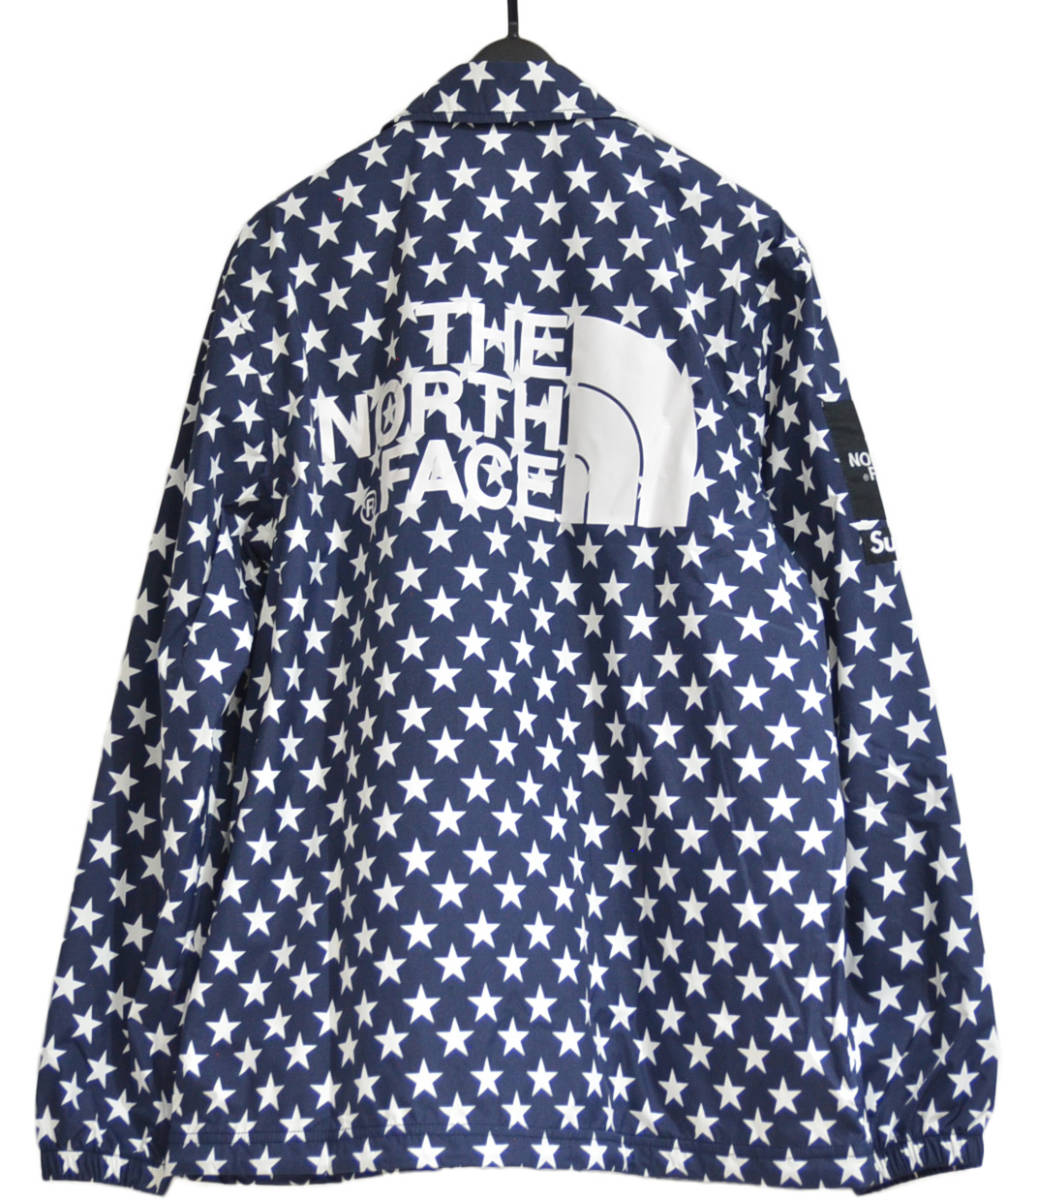 15SS Supreme × The North Face Packable Coaches Jacket シュプリーム スター パッカブル コーチジャケット 紺 M Y-265871_画像2